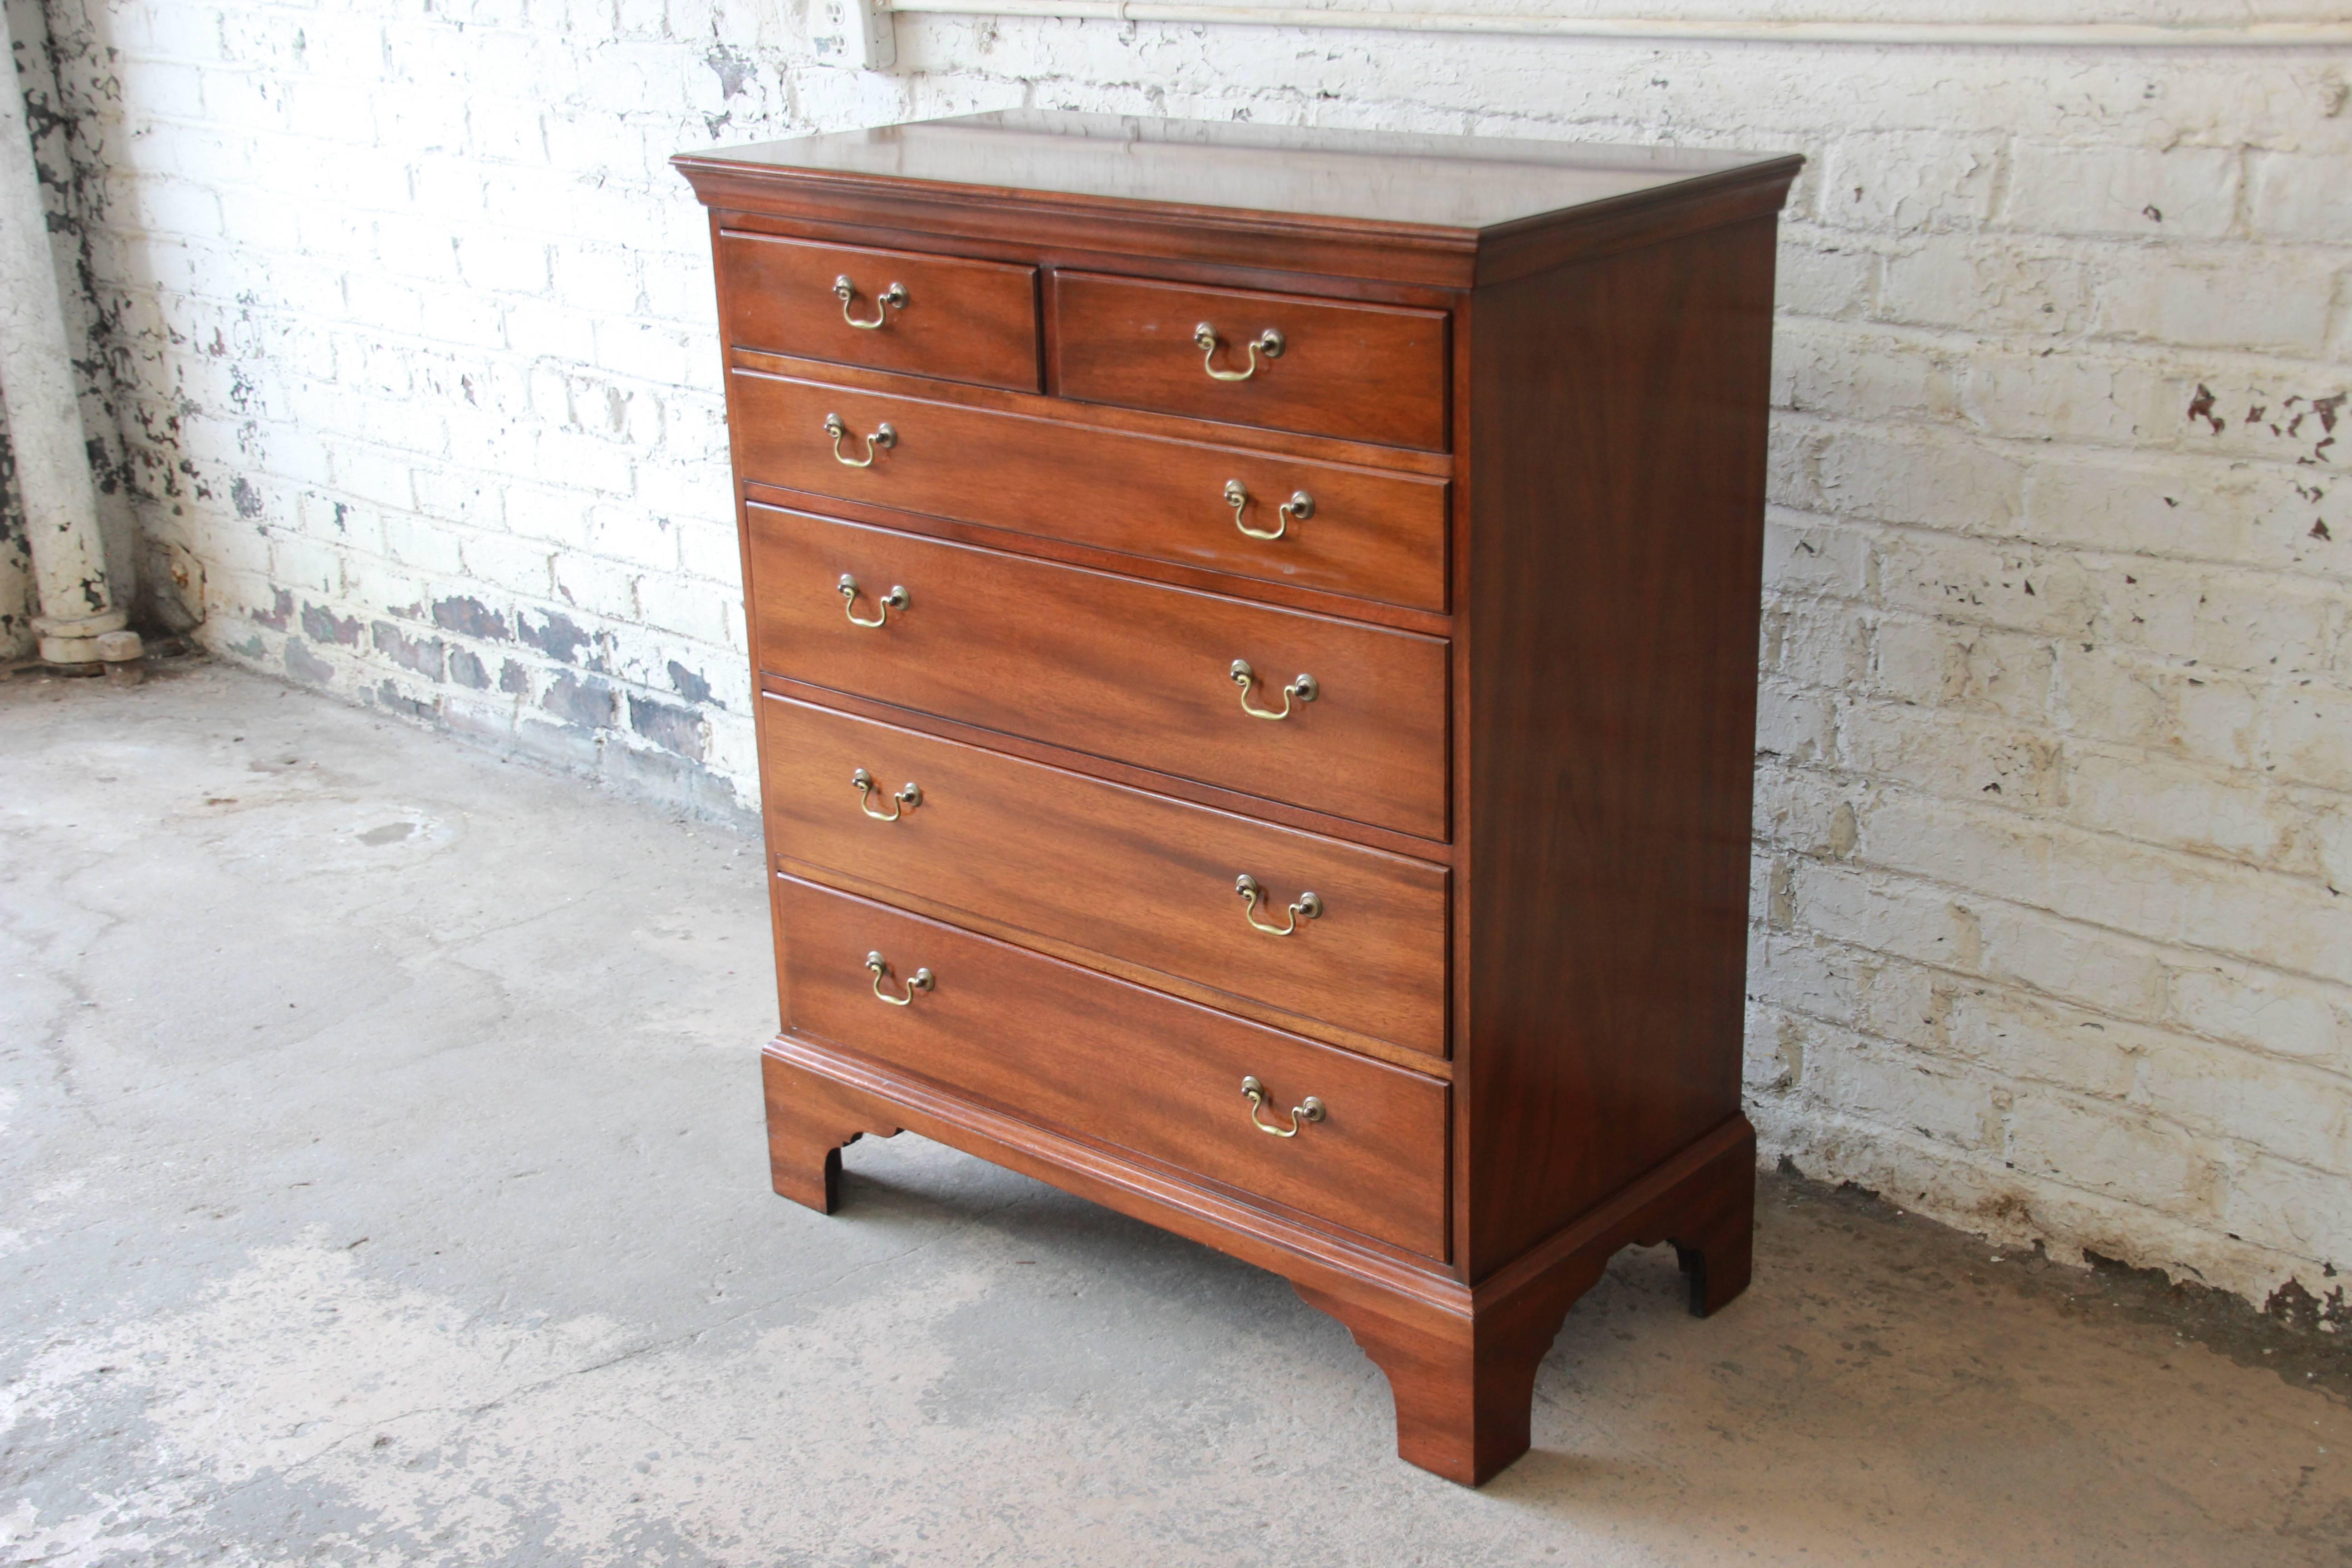 Offering a very nice and historic rendition Kittinger Williamsburg highboy dresser. This dresser has an elegant English design with six smooth sliding drawers for ample storage. It has a nice wood grain that appears to have a walnut graining on the